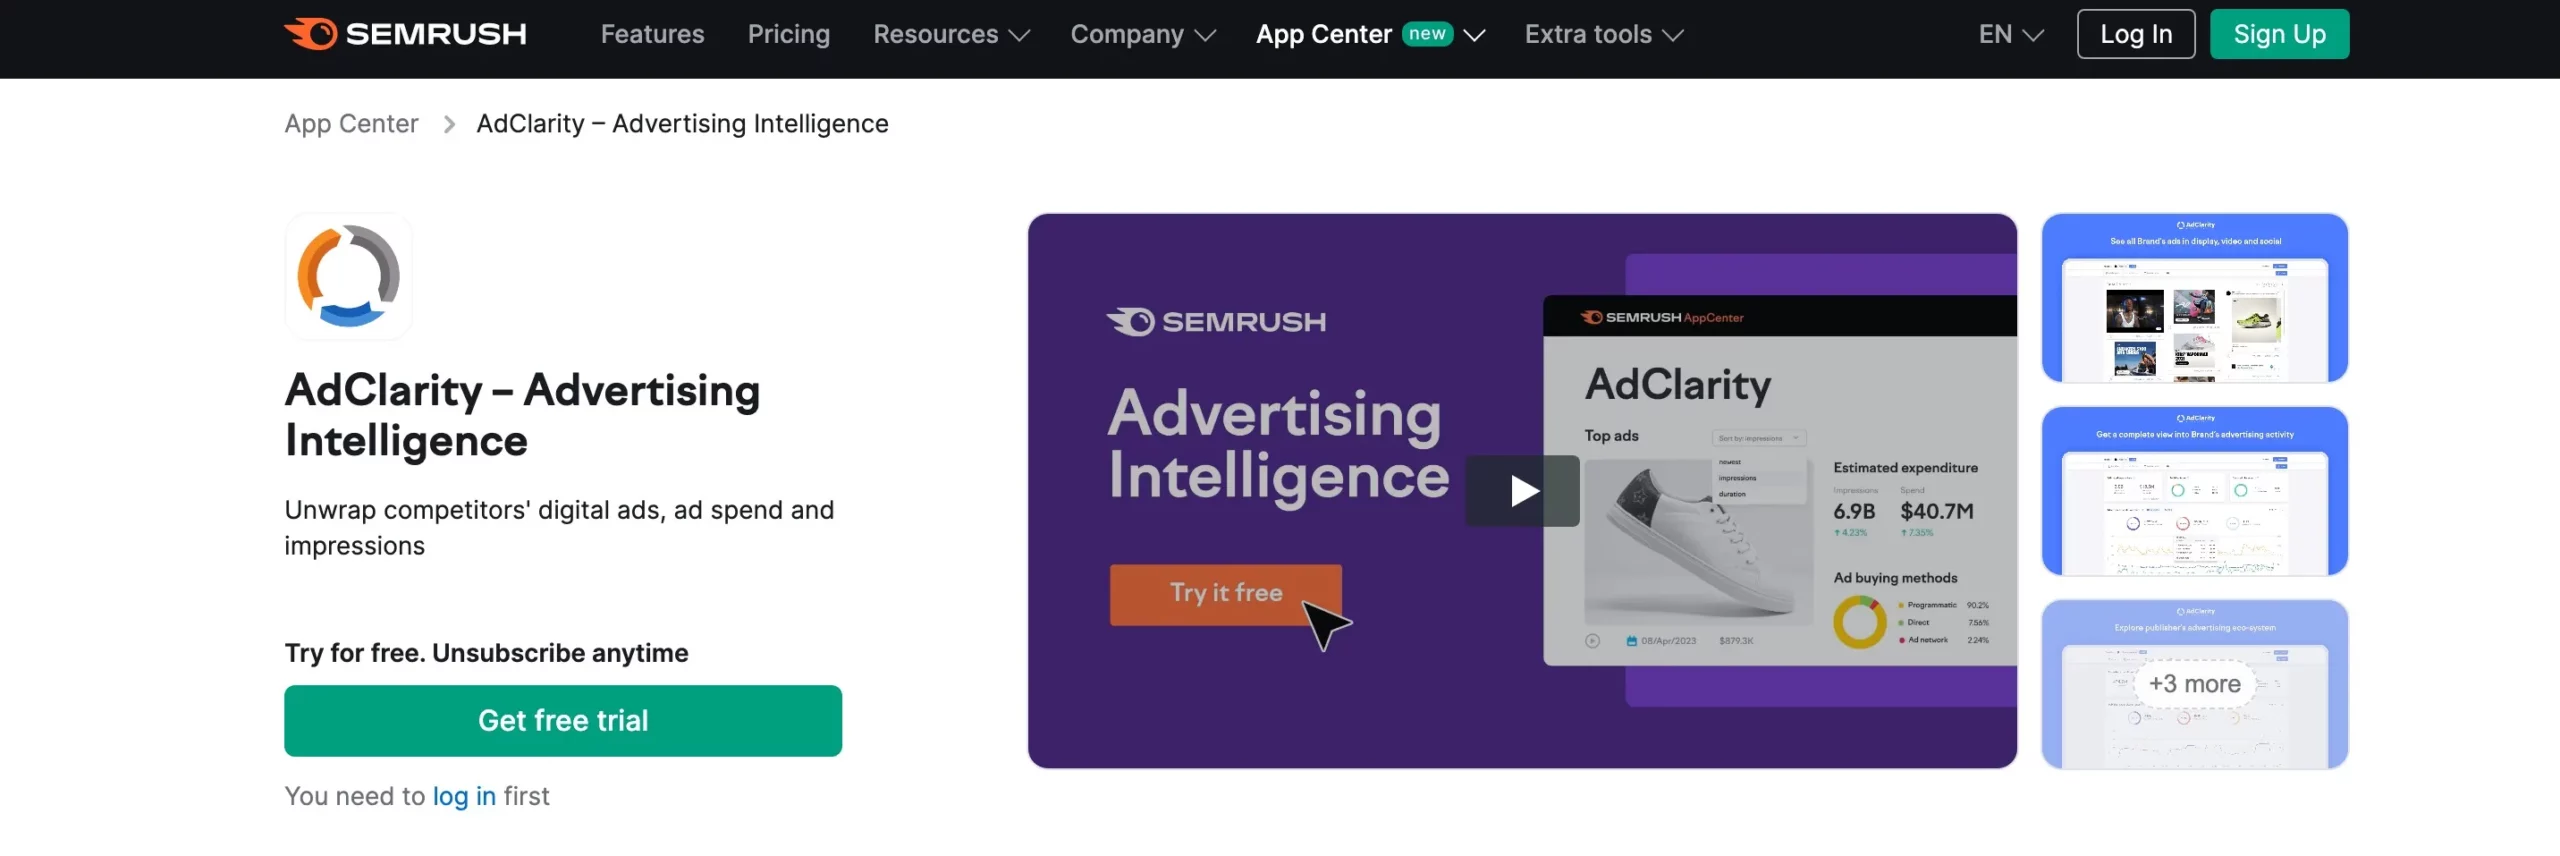 AdClarity By SemRush Apps Review